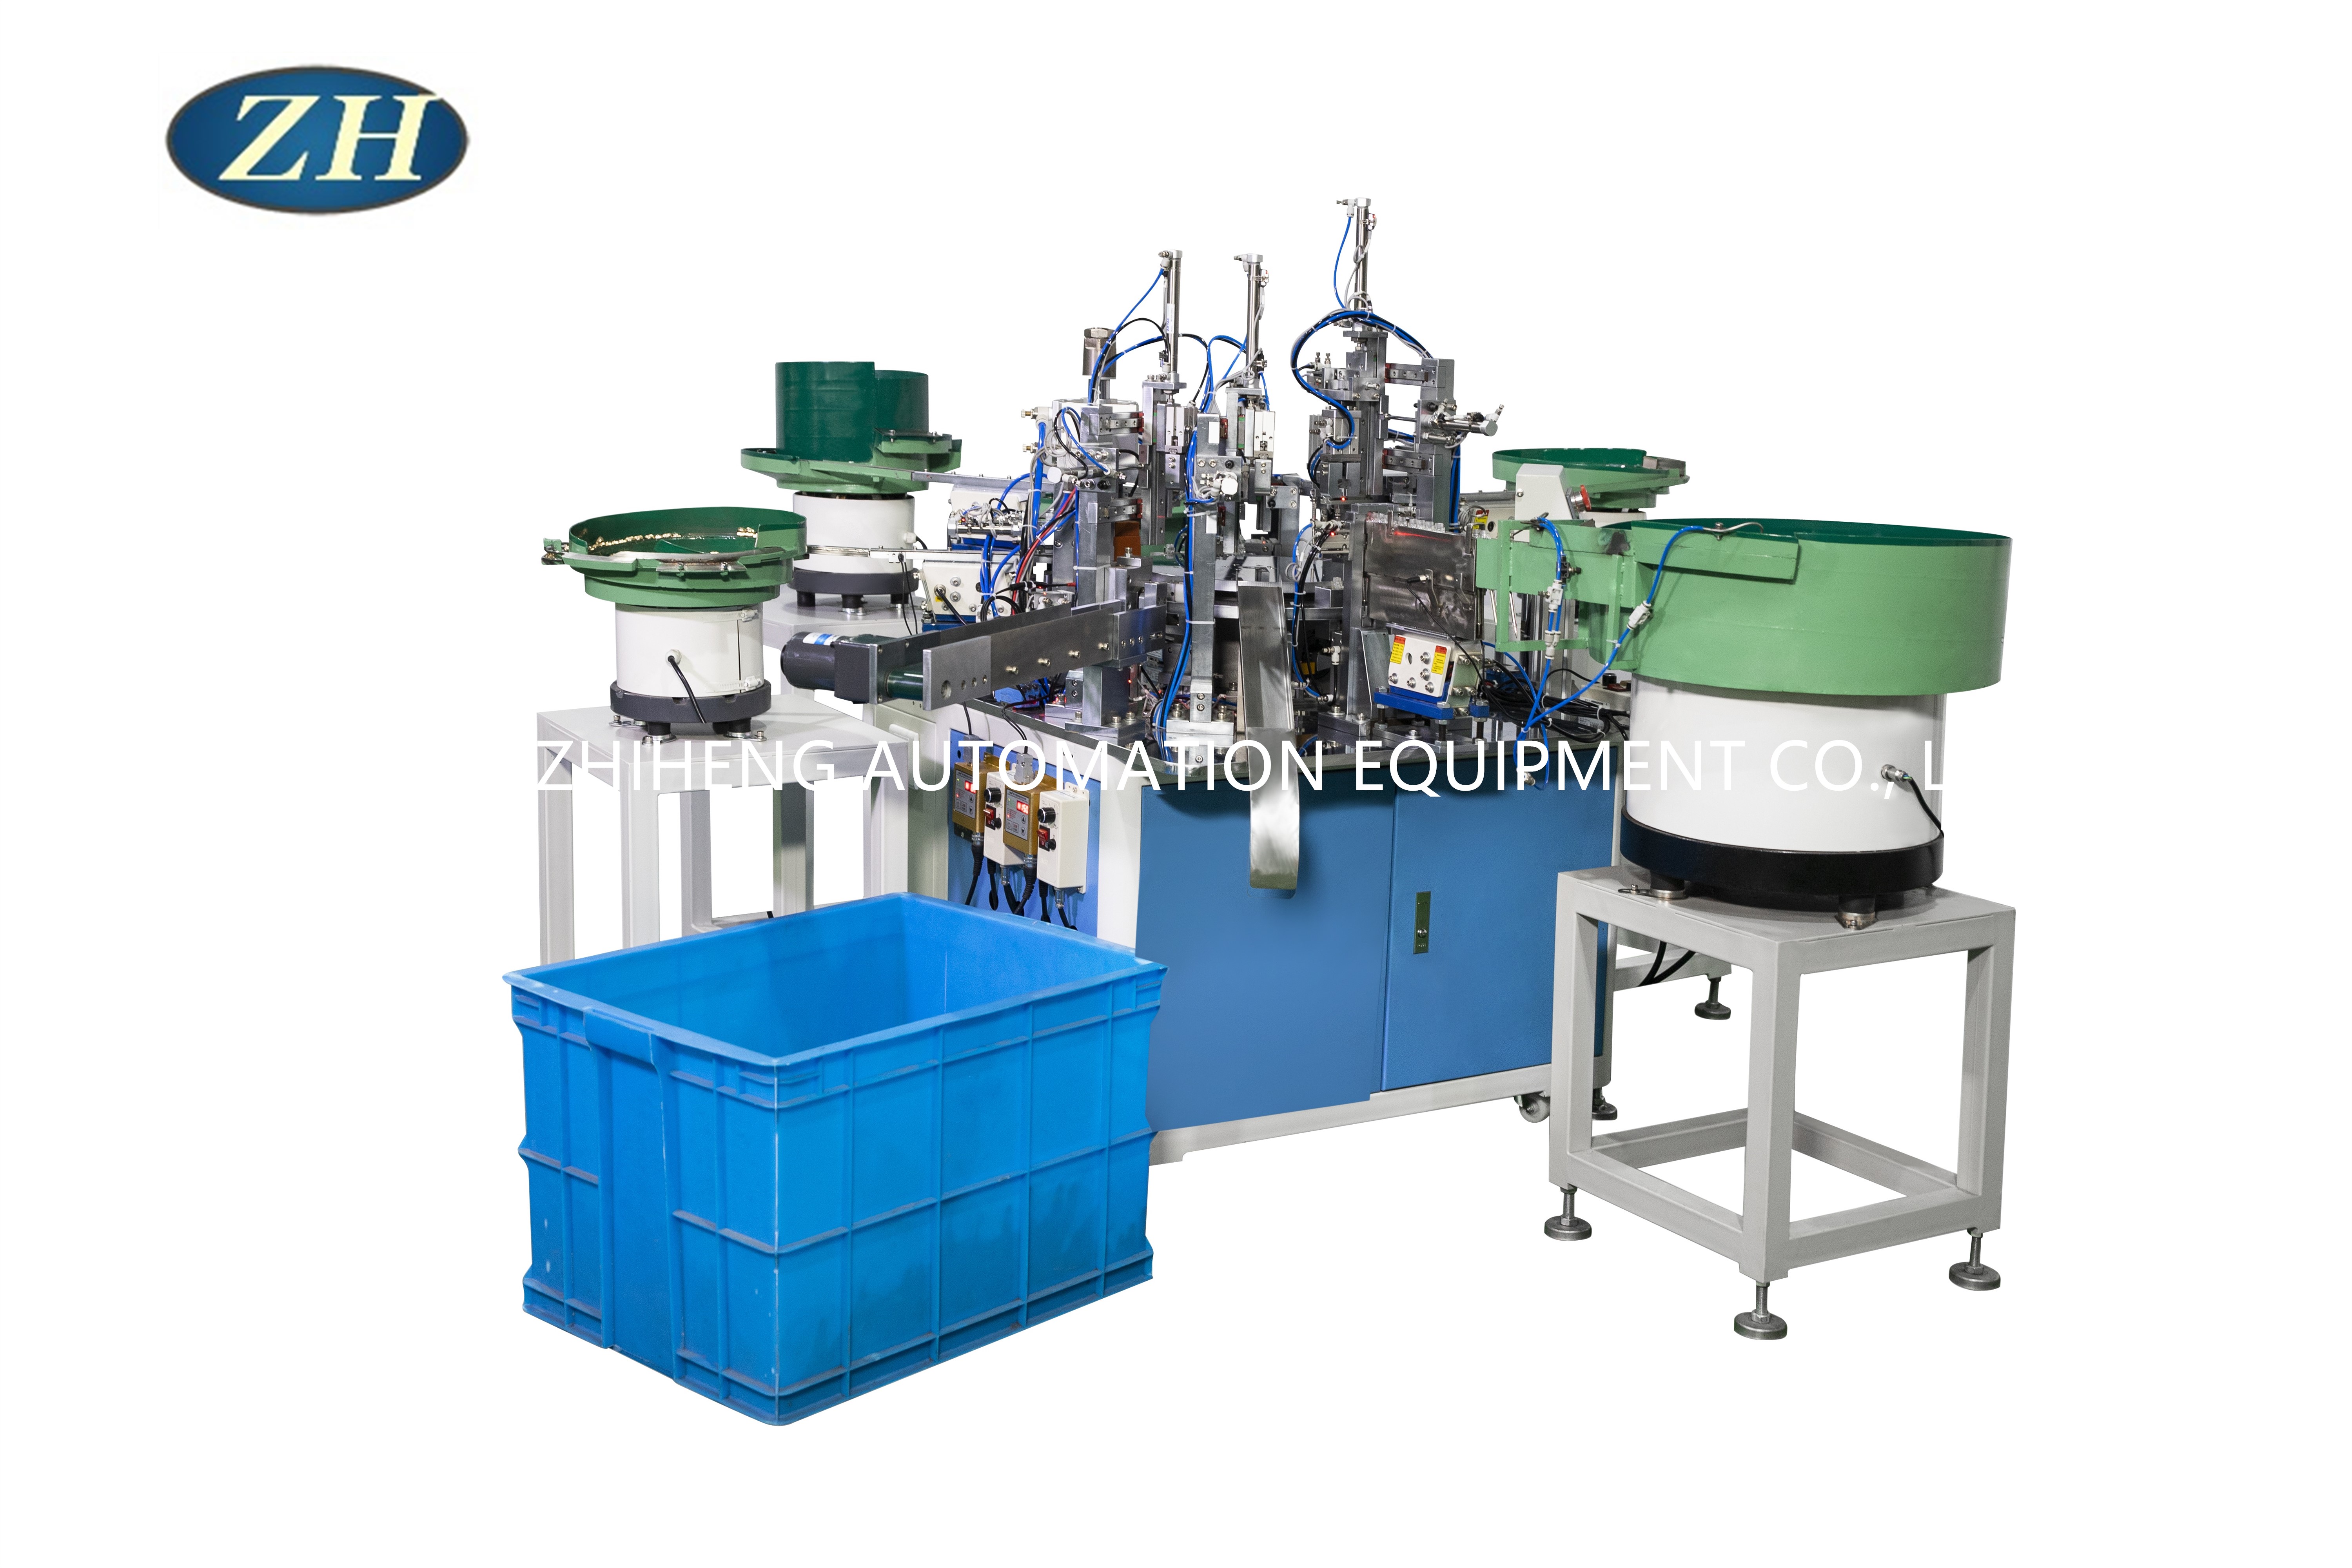 Automatic Assembly Machine for Electroprobe